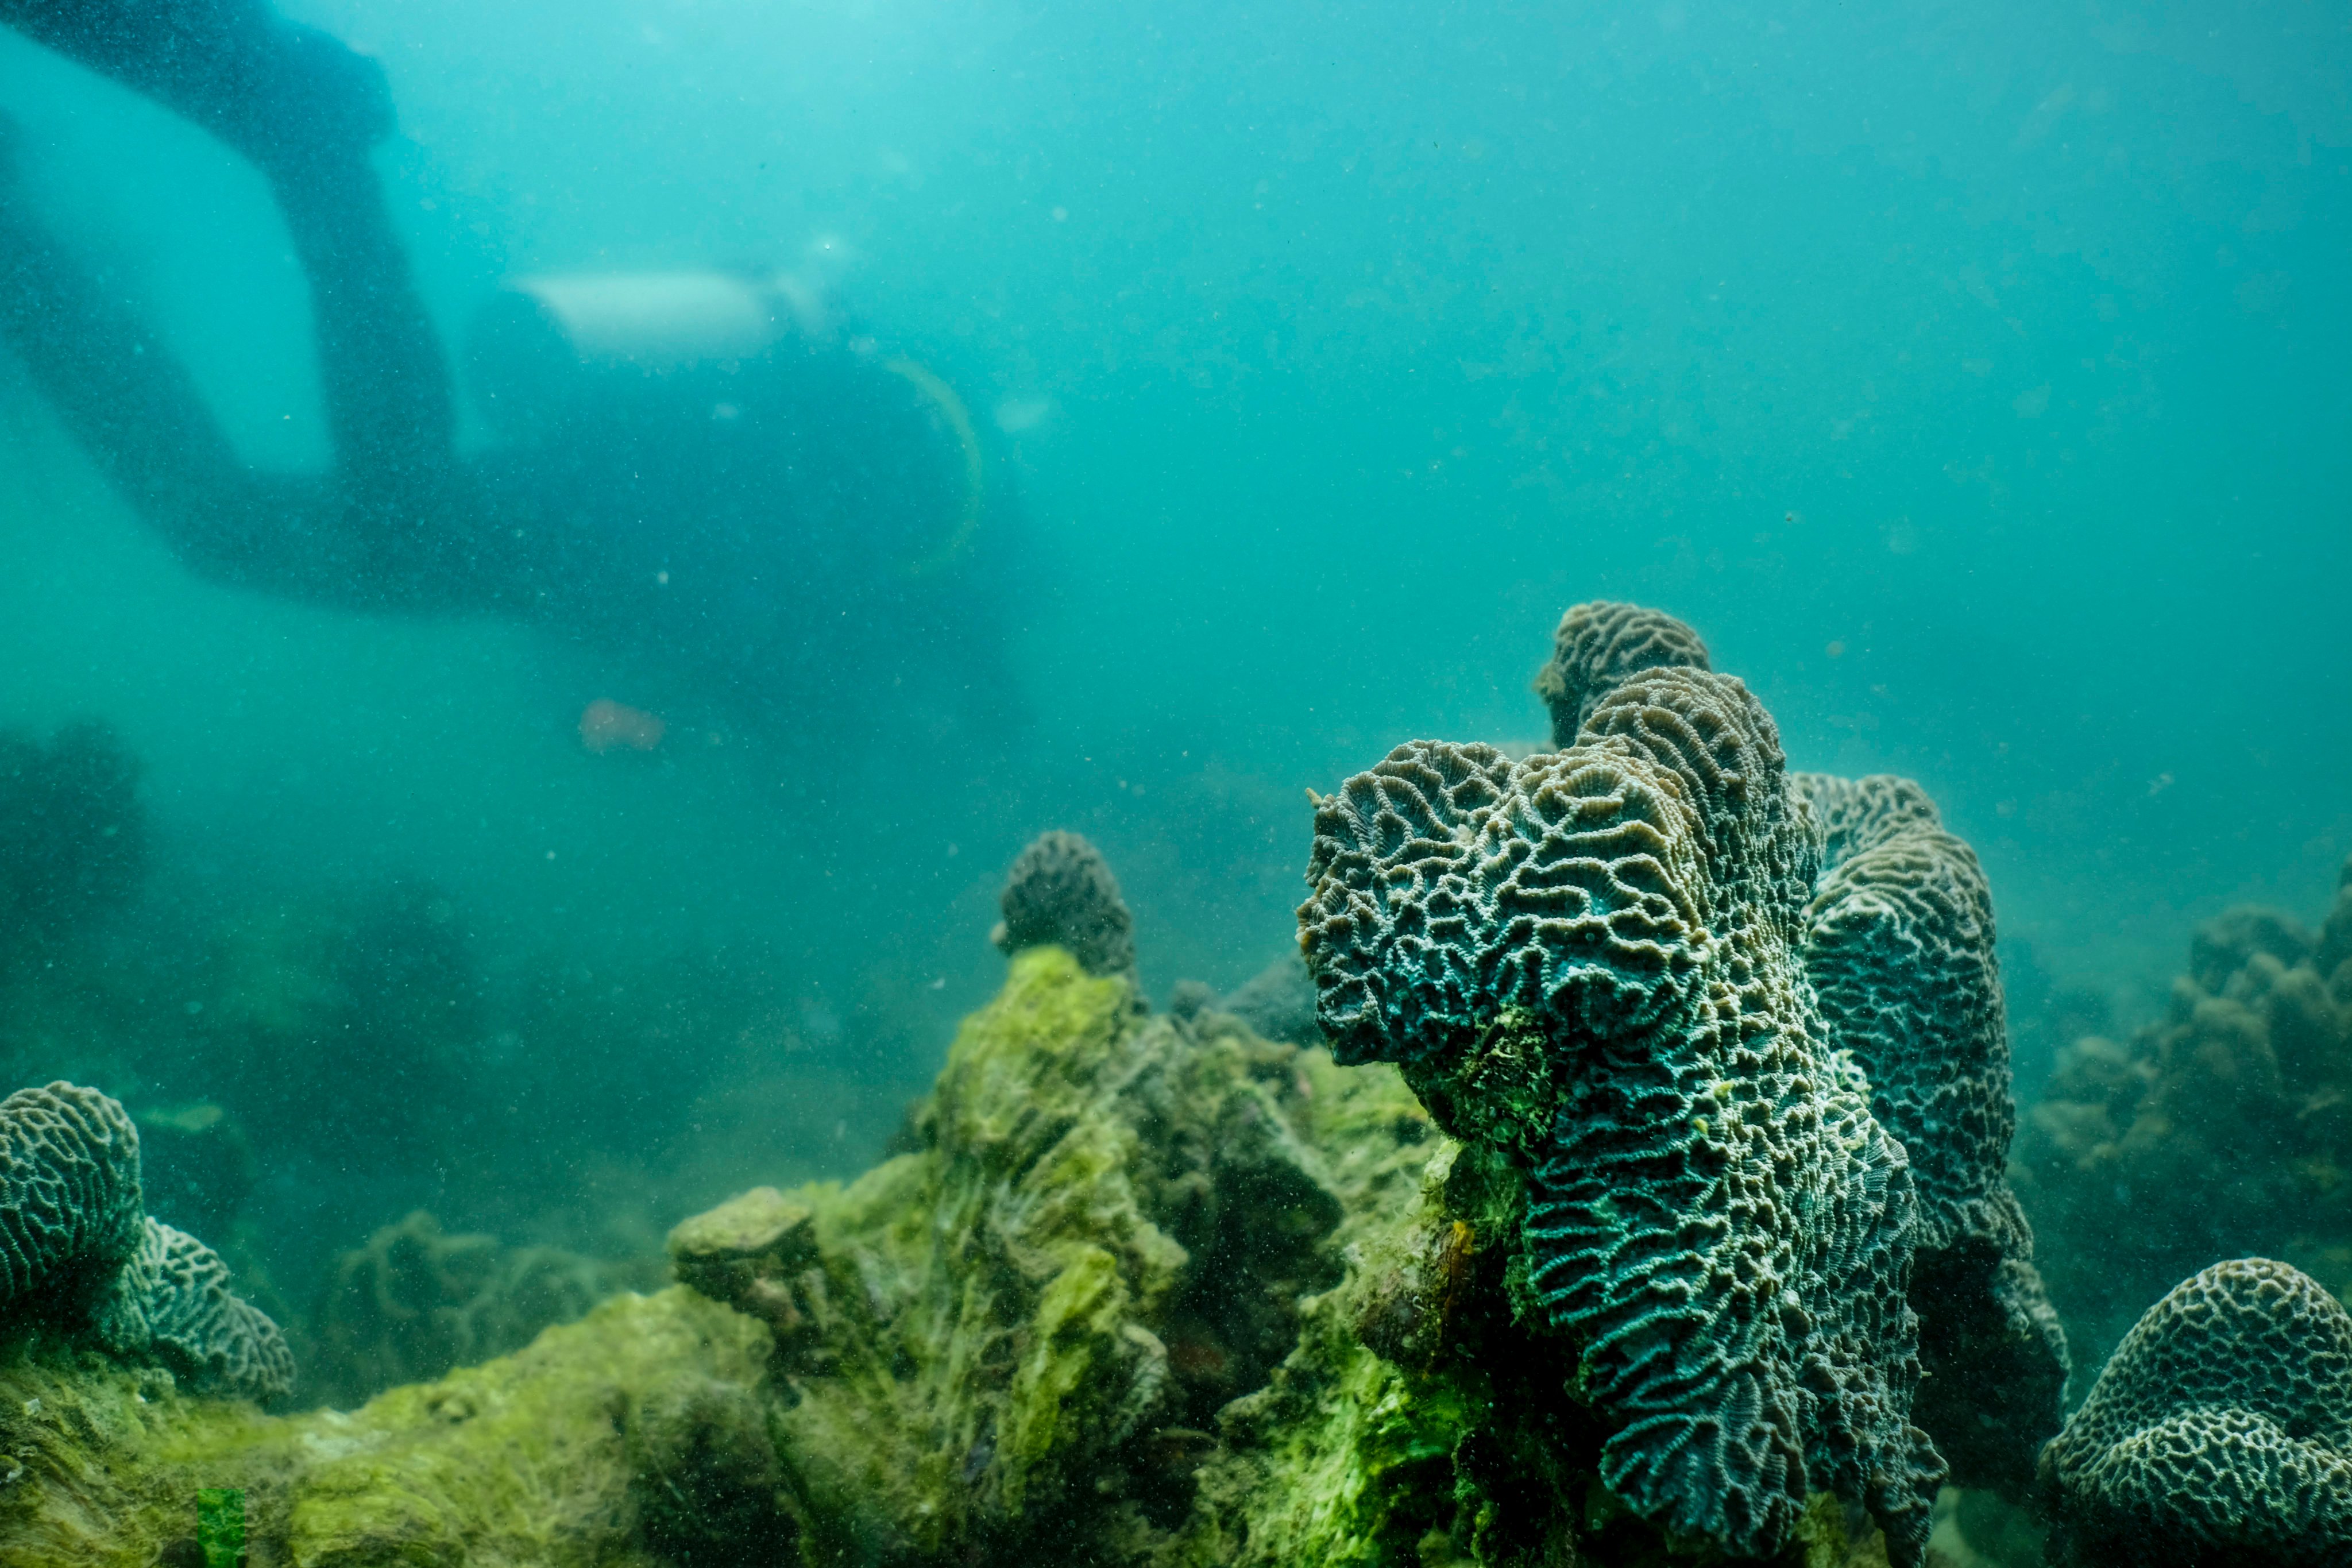 A divers checks coral on the seabed in Hoi Ha Wan, Sai Kung, in December 2018. Photo: SCMP 